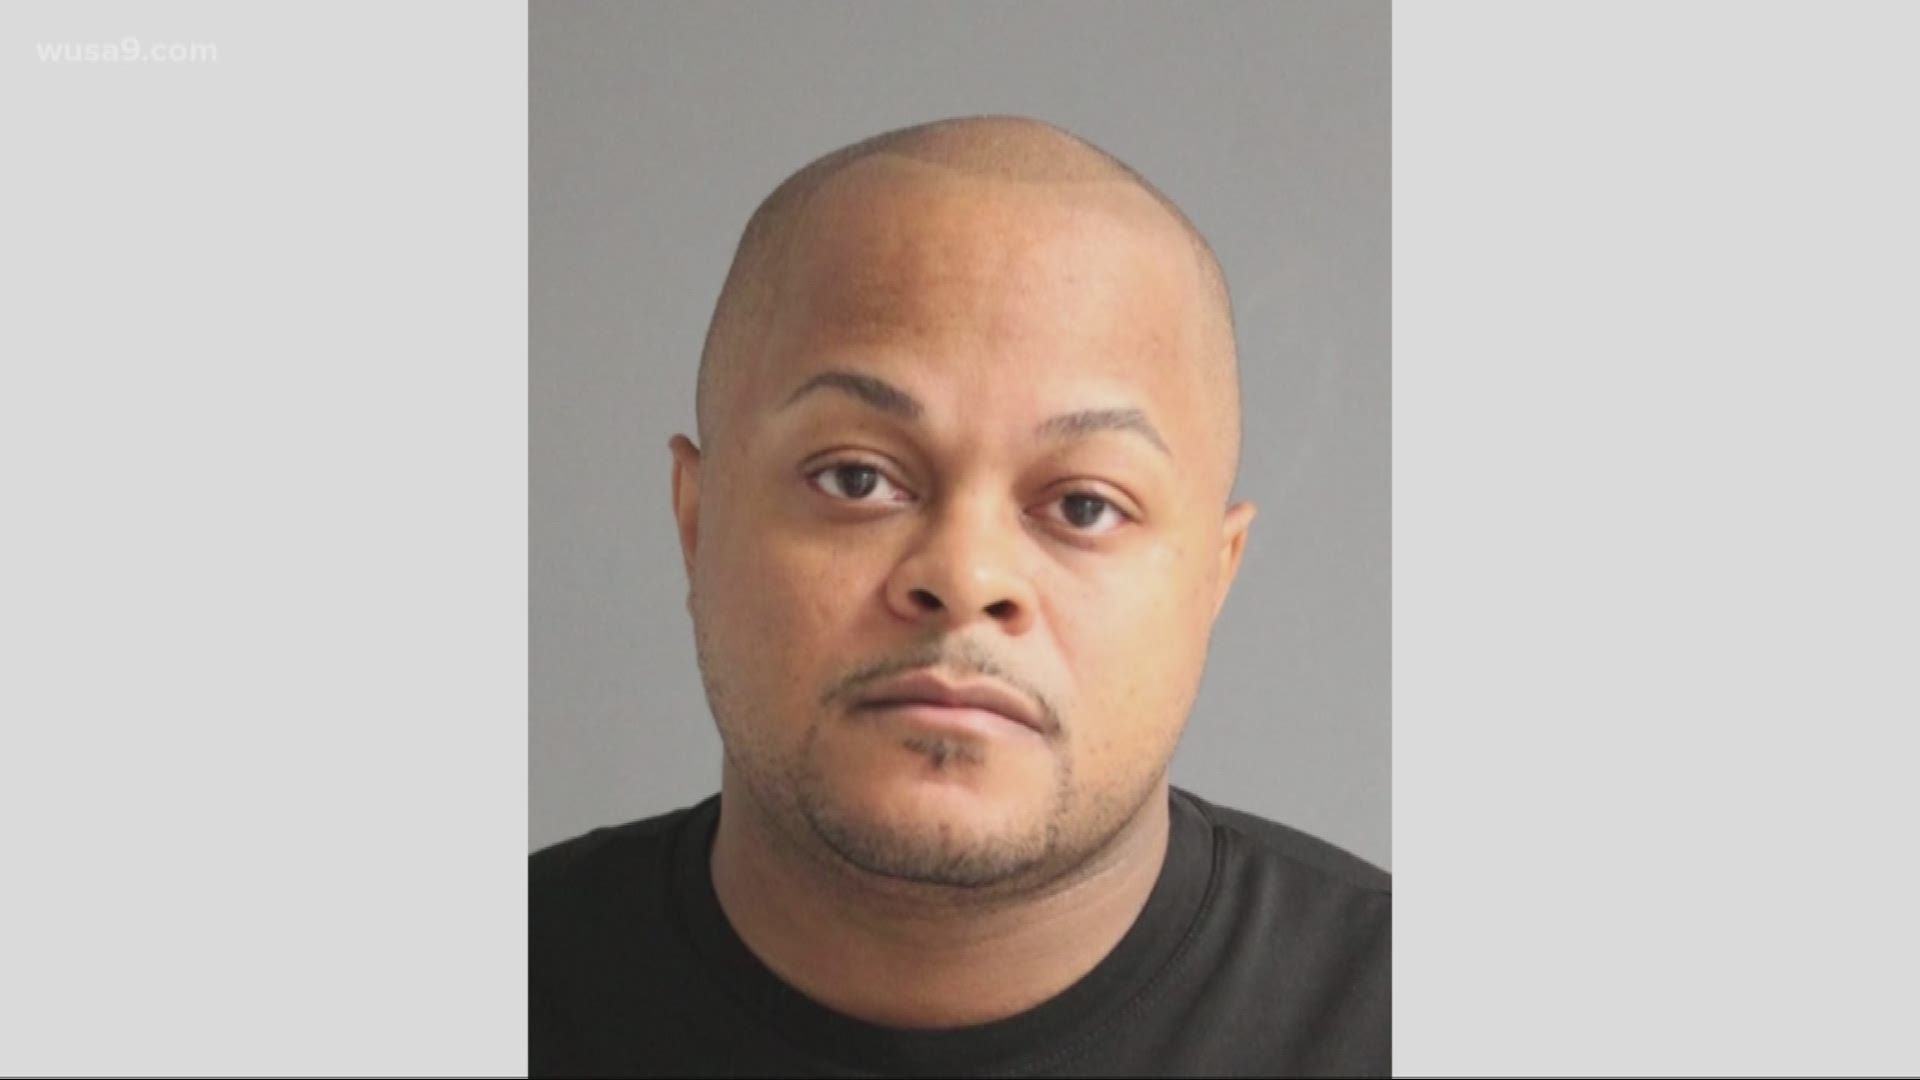 The impersonator was extorting money, particularly from Hispanic-owned businesses, police said.